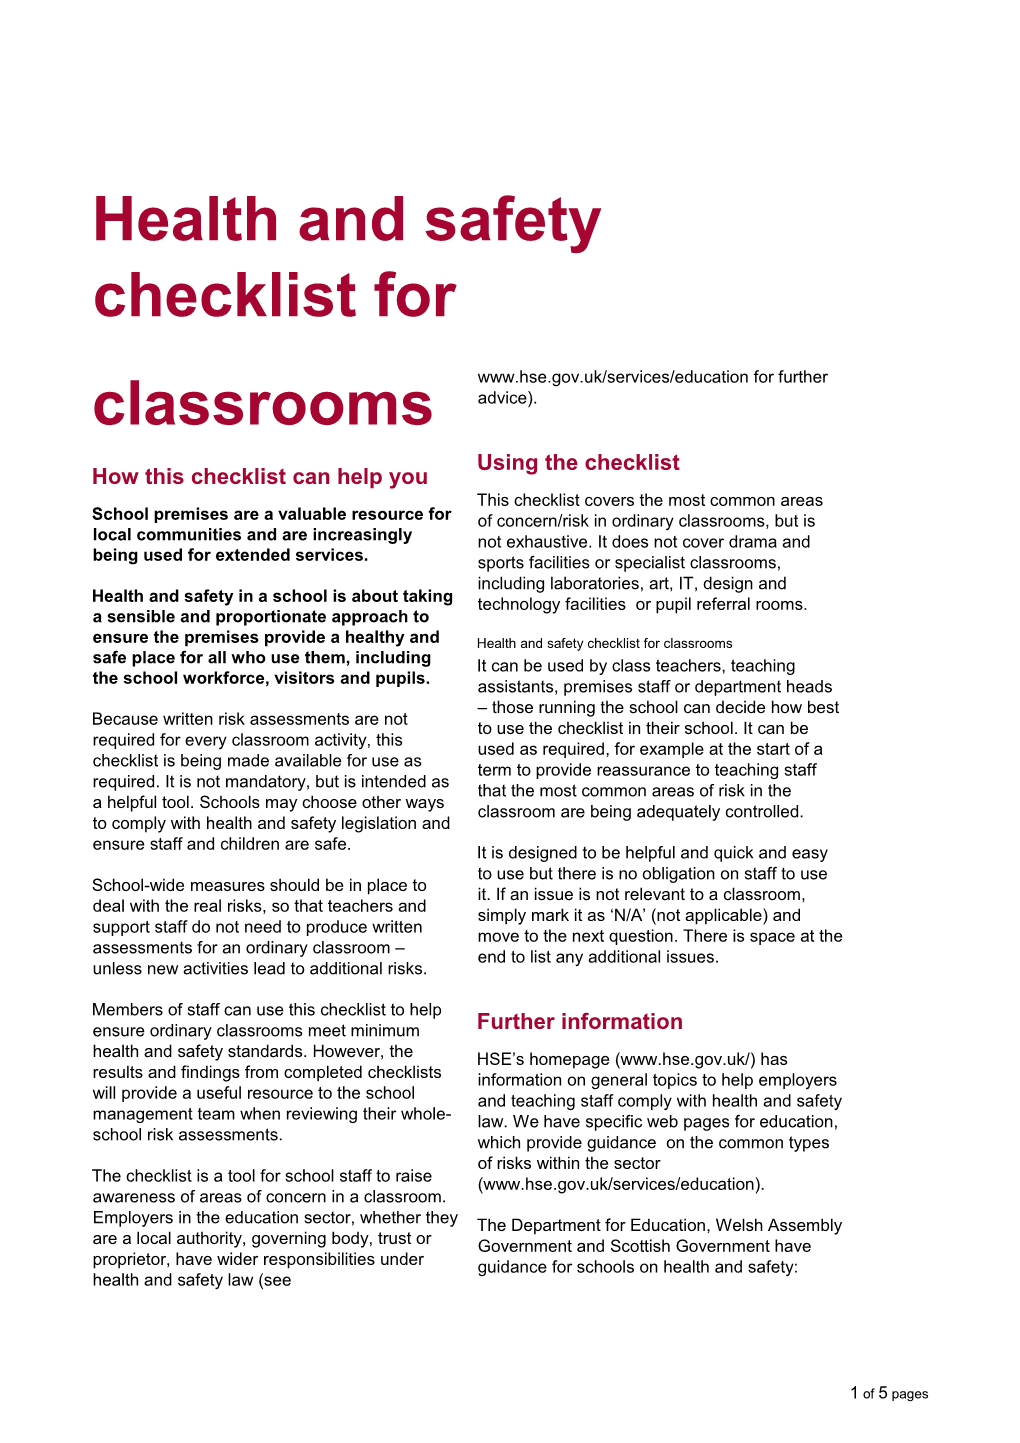 Health and Safety Checklist for Classrooms